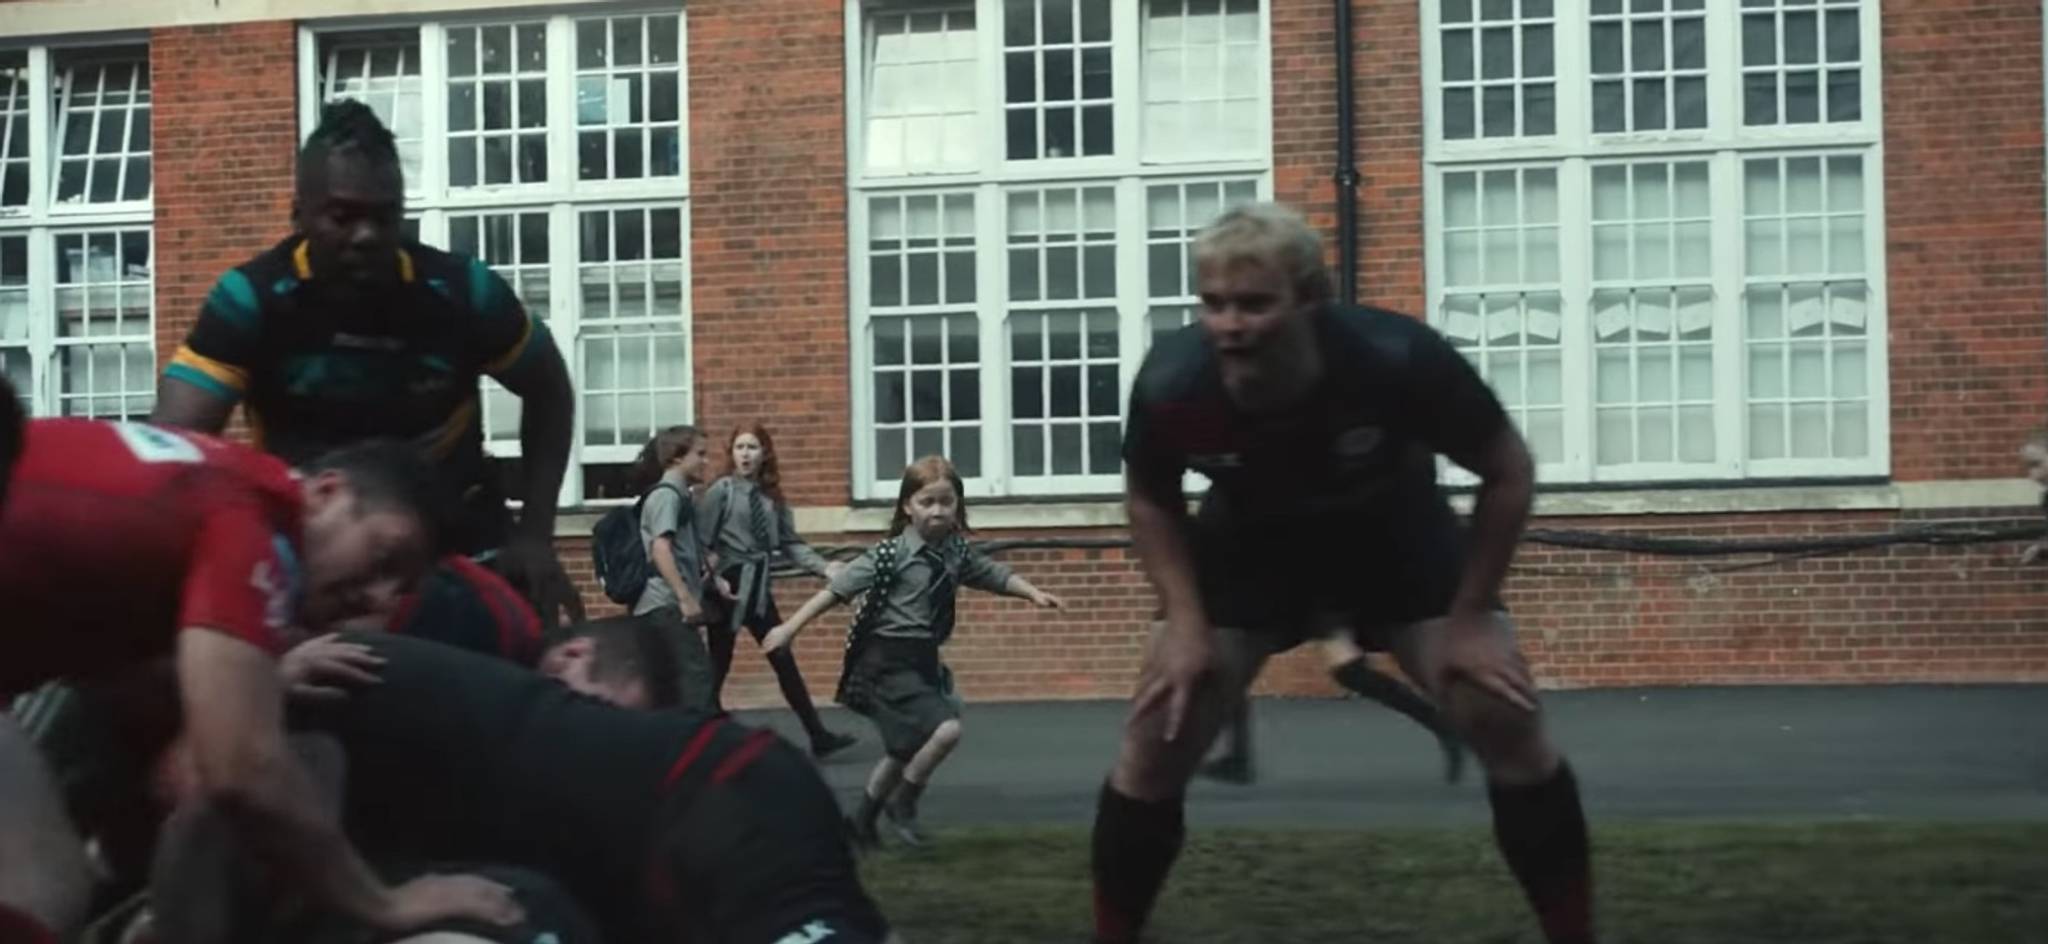 BT Sport Ad inspires young girls to get active